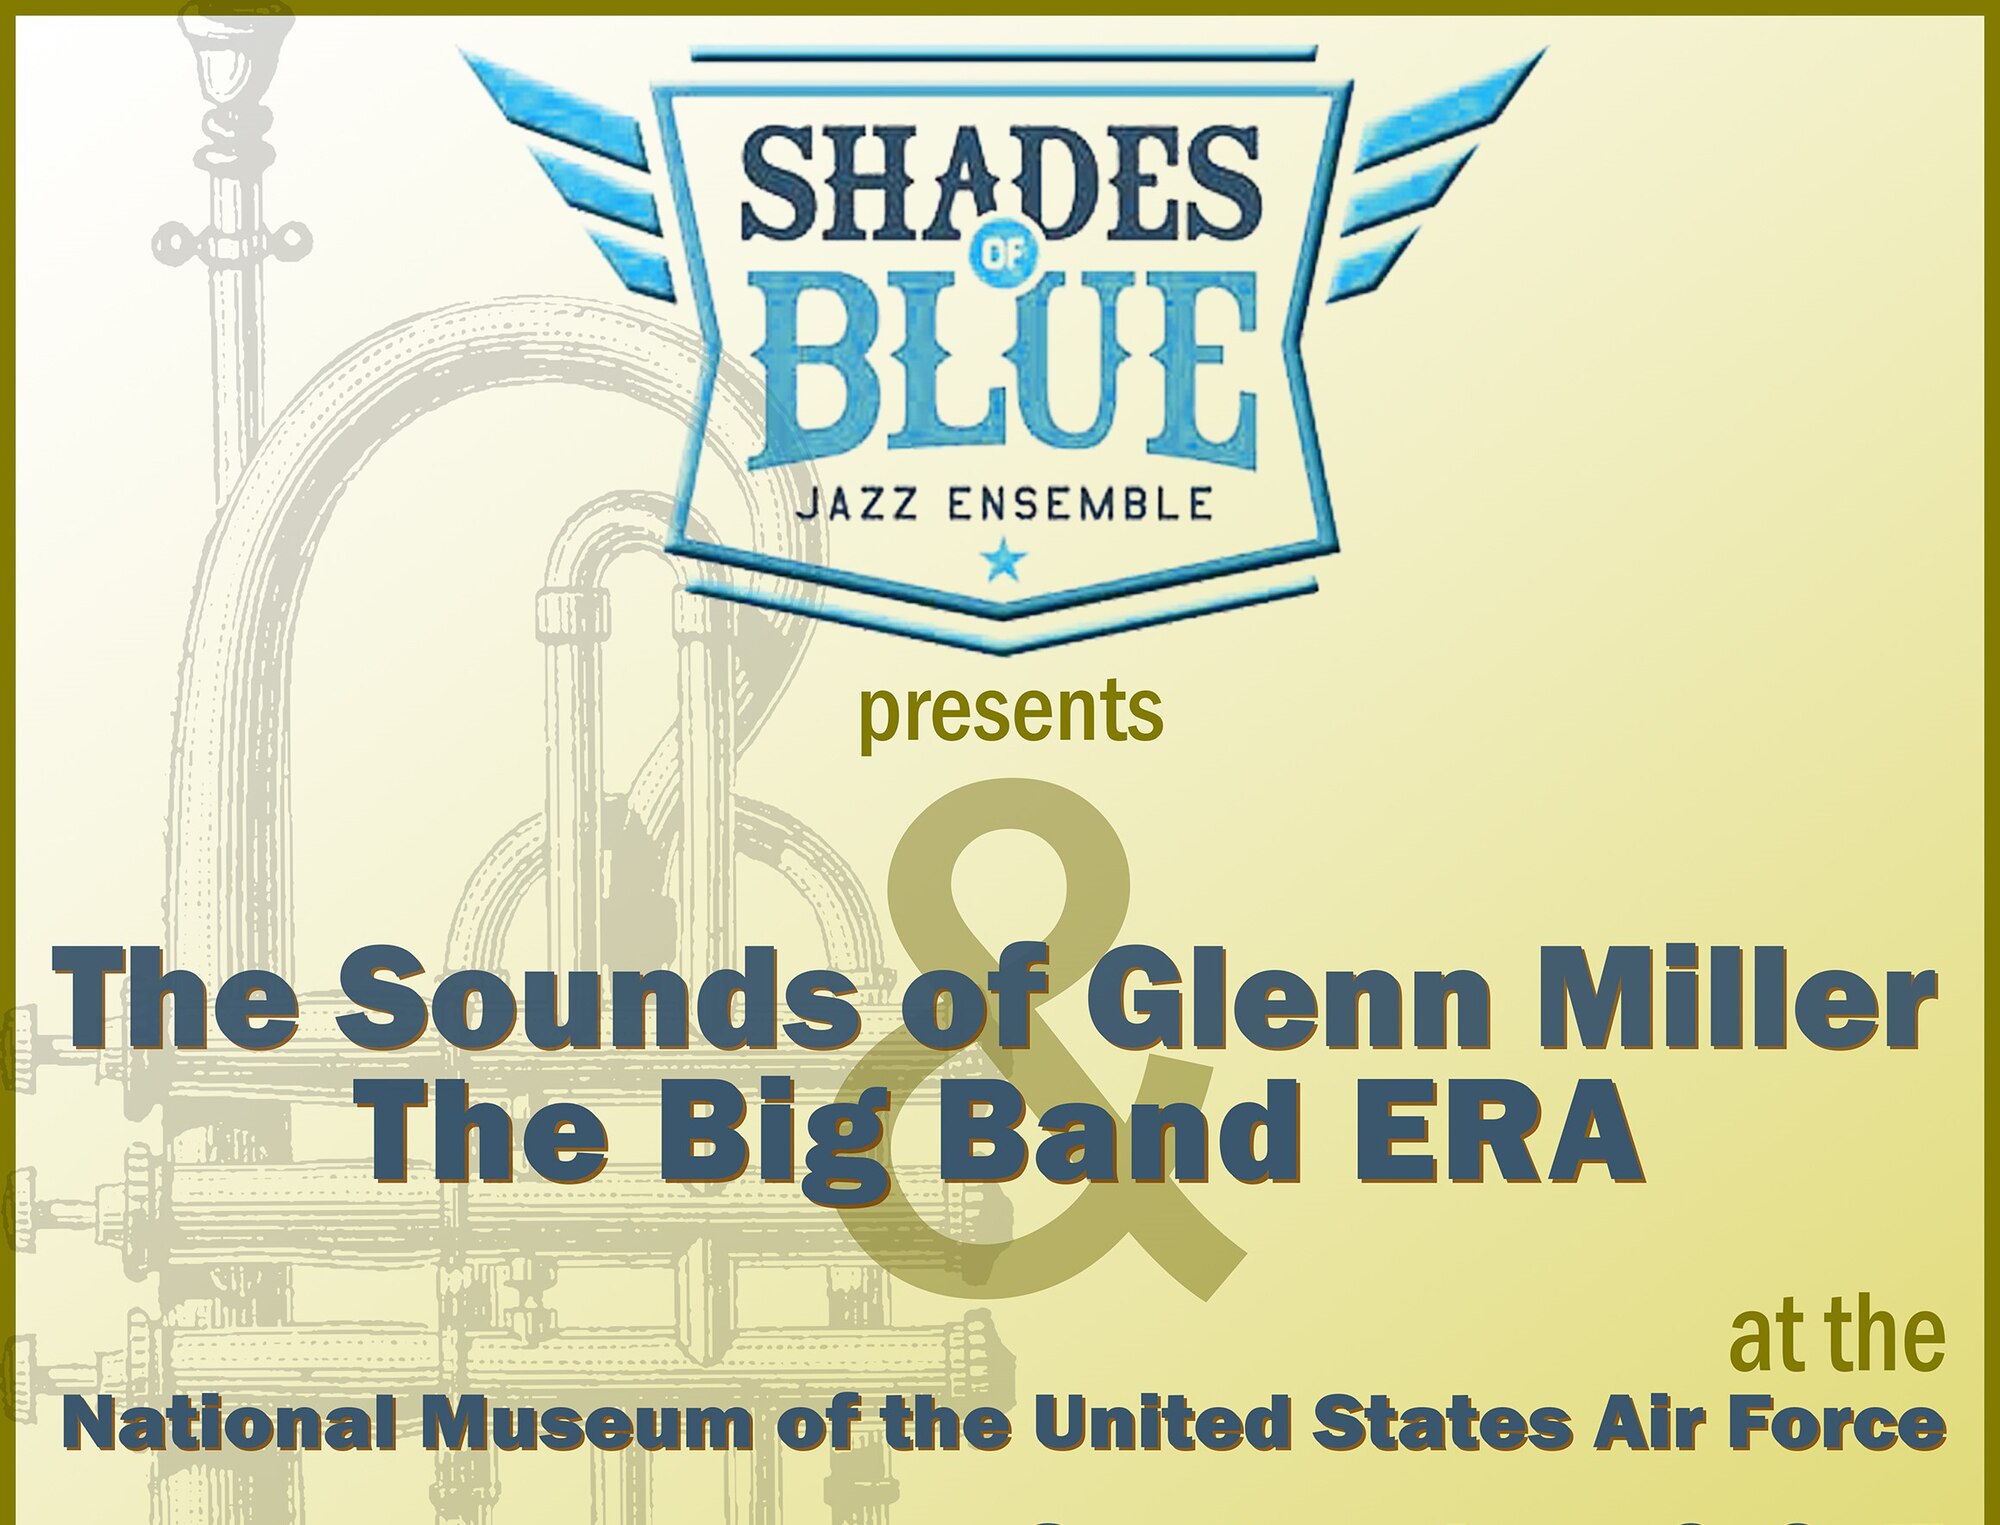 Shades of Blue Jazz Ensemble comprised of musicians from the Air Force Band of Flight at Wright-Patterson AFB, OH and the Air Force Band of Mid-America (Scott AFB, IL) will perform a Big Band Concert featuring the music of Glenn Miller and other favorites from the big band era. The music set will be the same for each night and no tickets are required. Museum doors will open at 6:30 p.m.